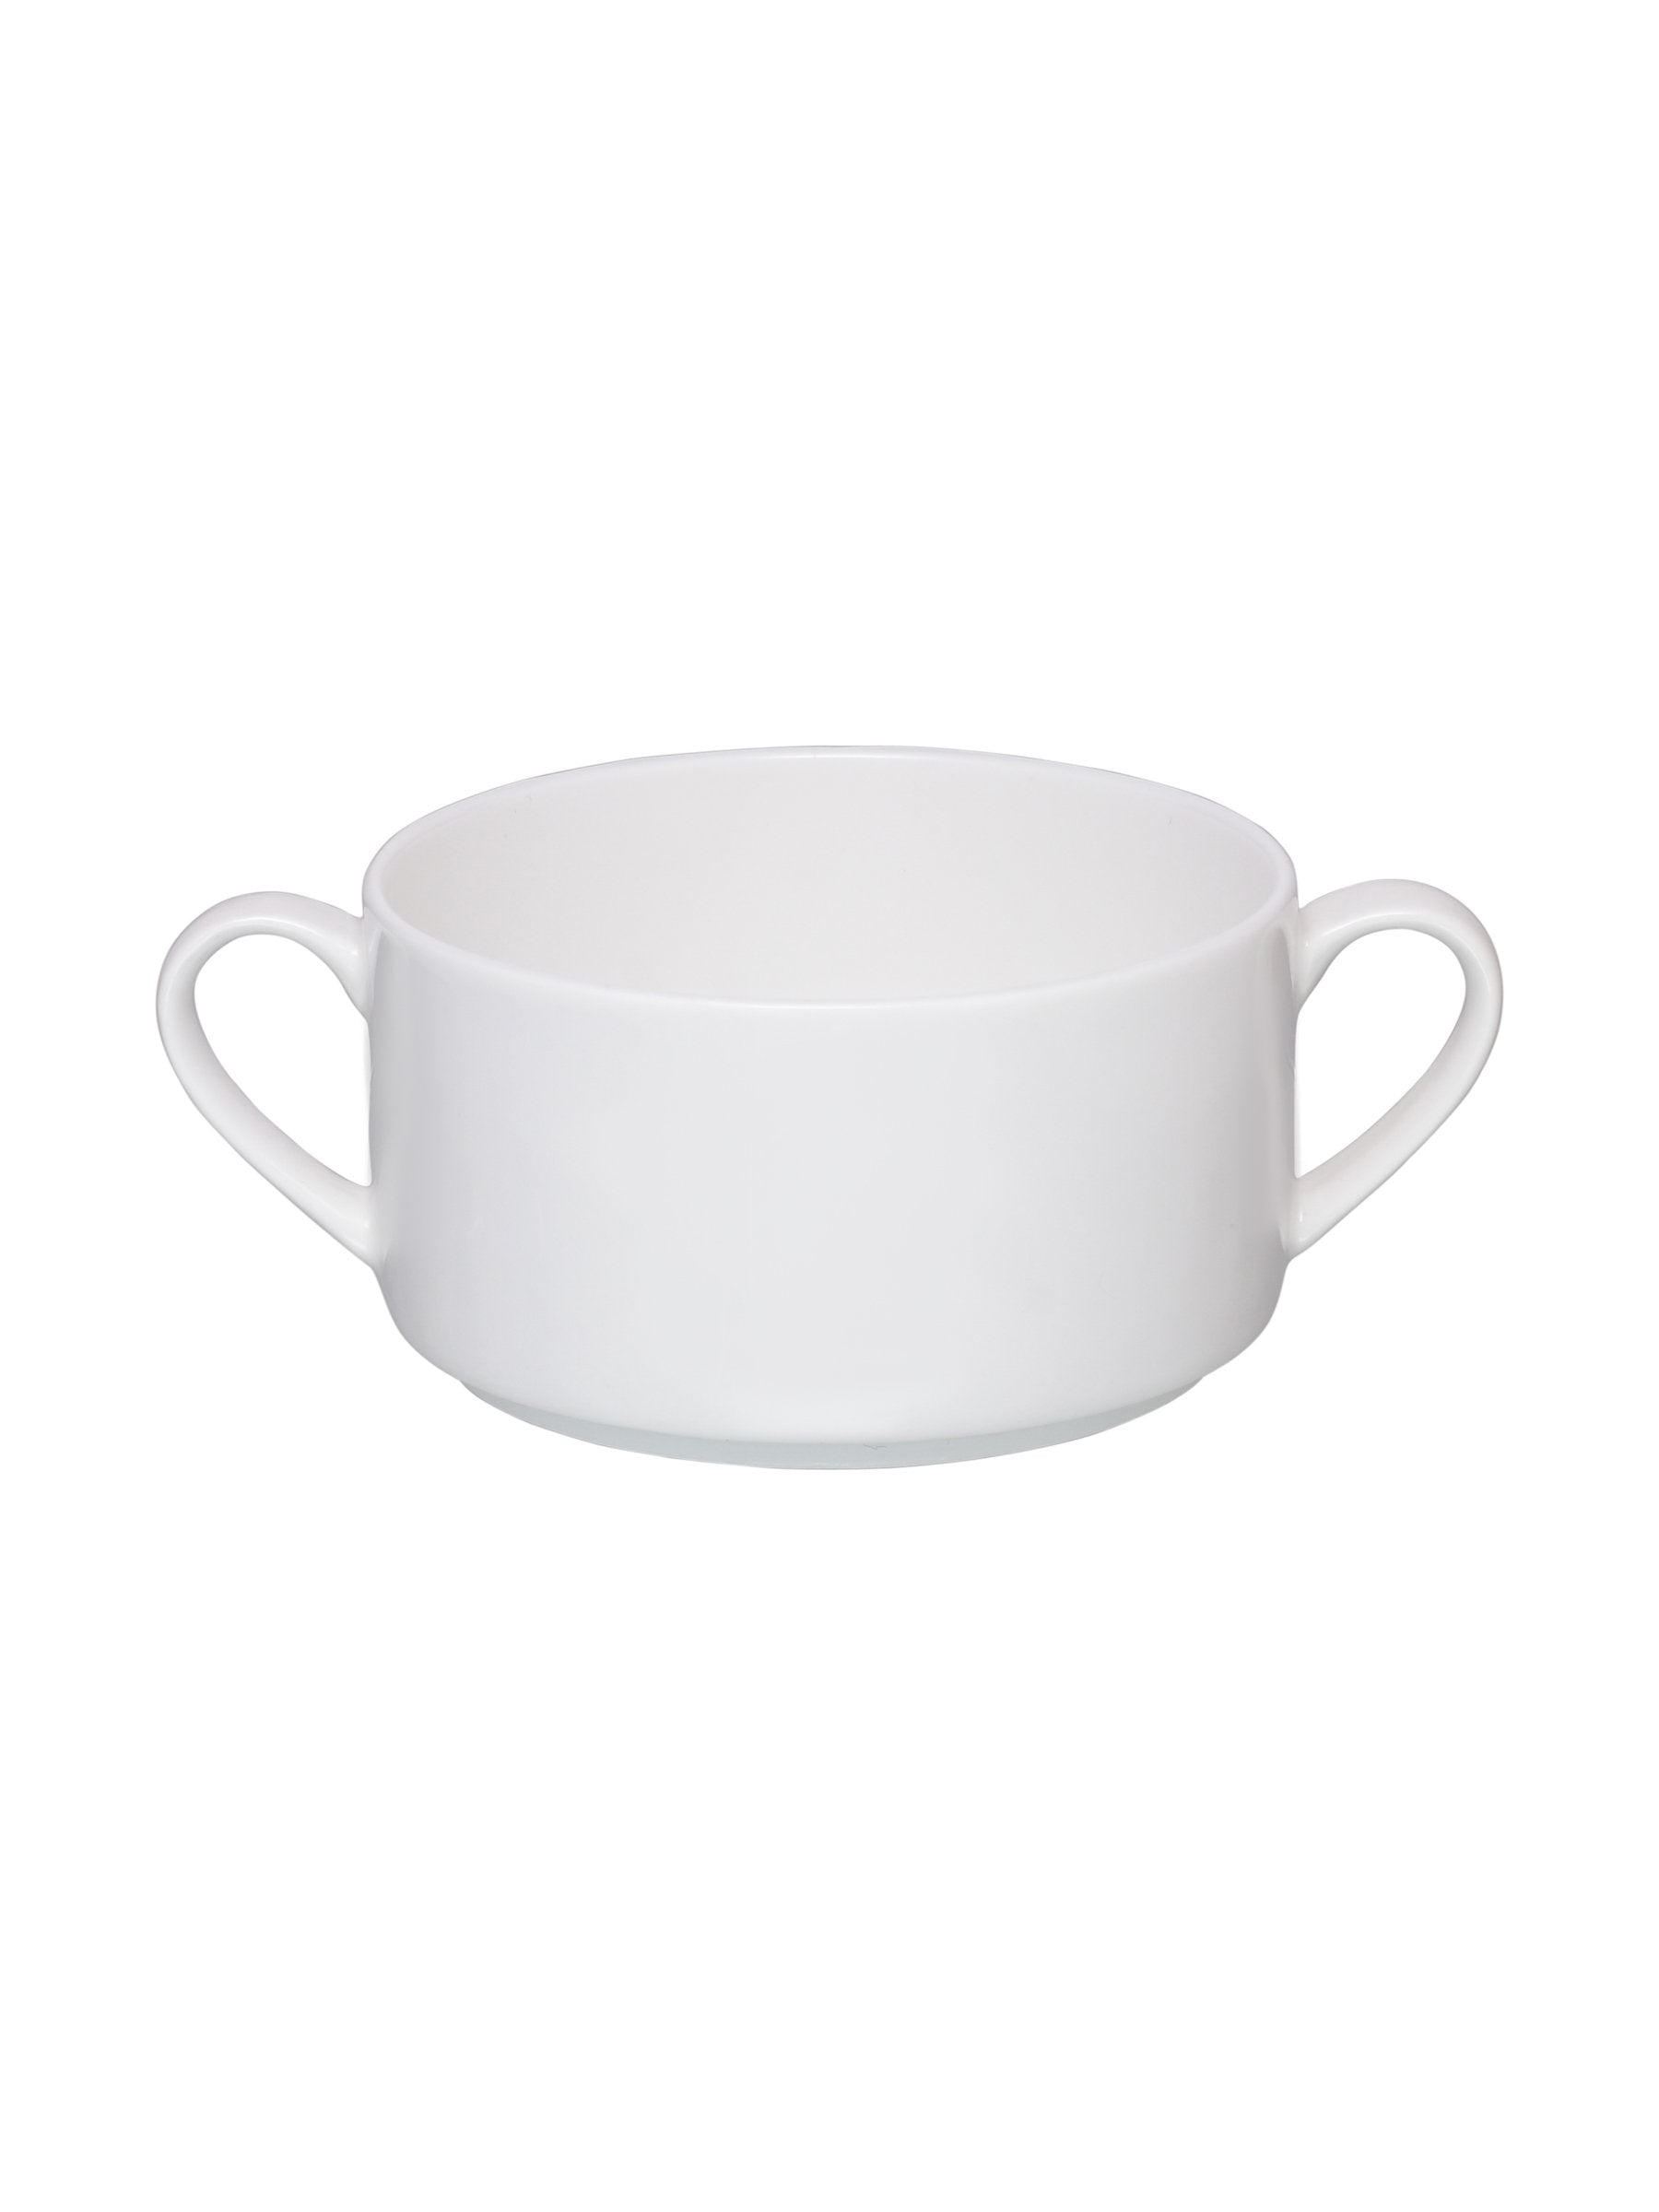 Clay Craft Basic Stacko Soupbowl with Handle 4 Piece Plain White - Clay Craft India